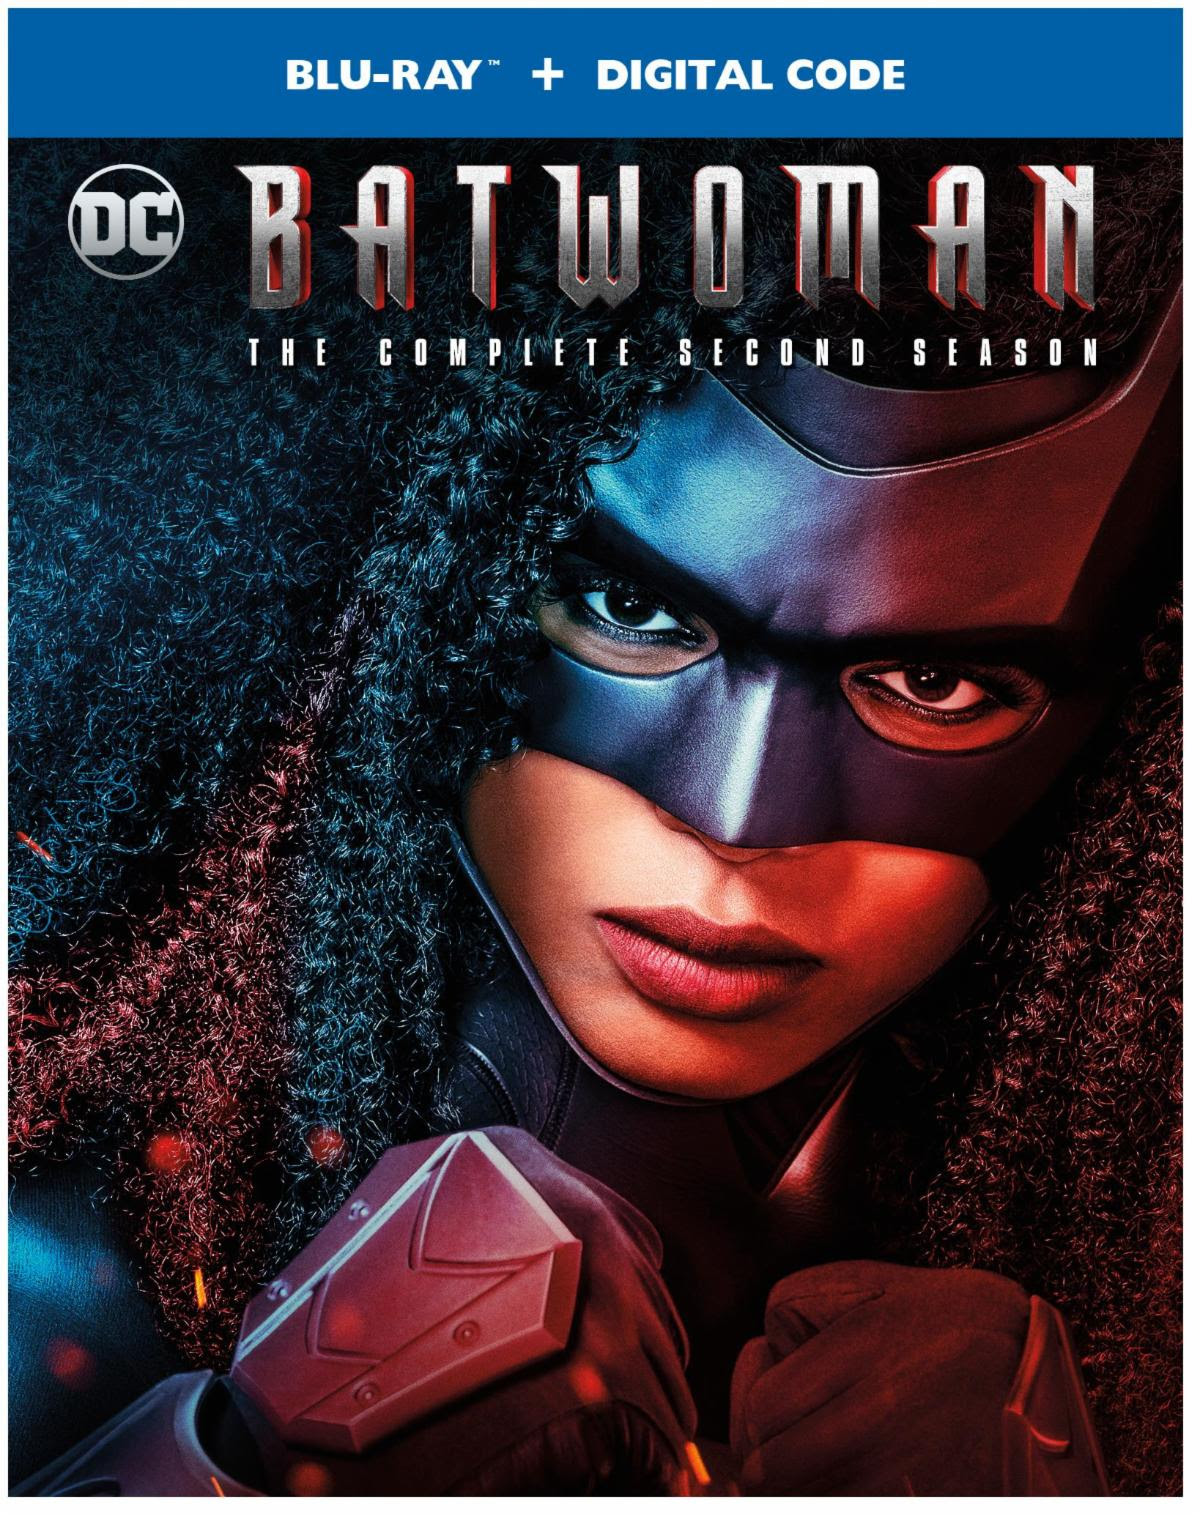 Batwoman: The Complete Second Season – Arrives on Blu-ray & DVD September 21, 2021